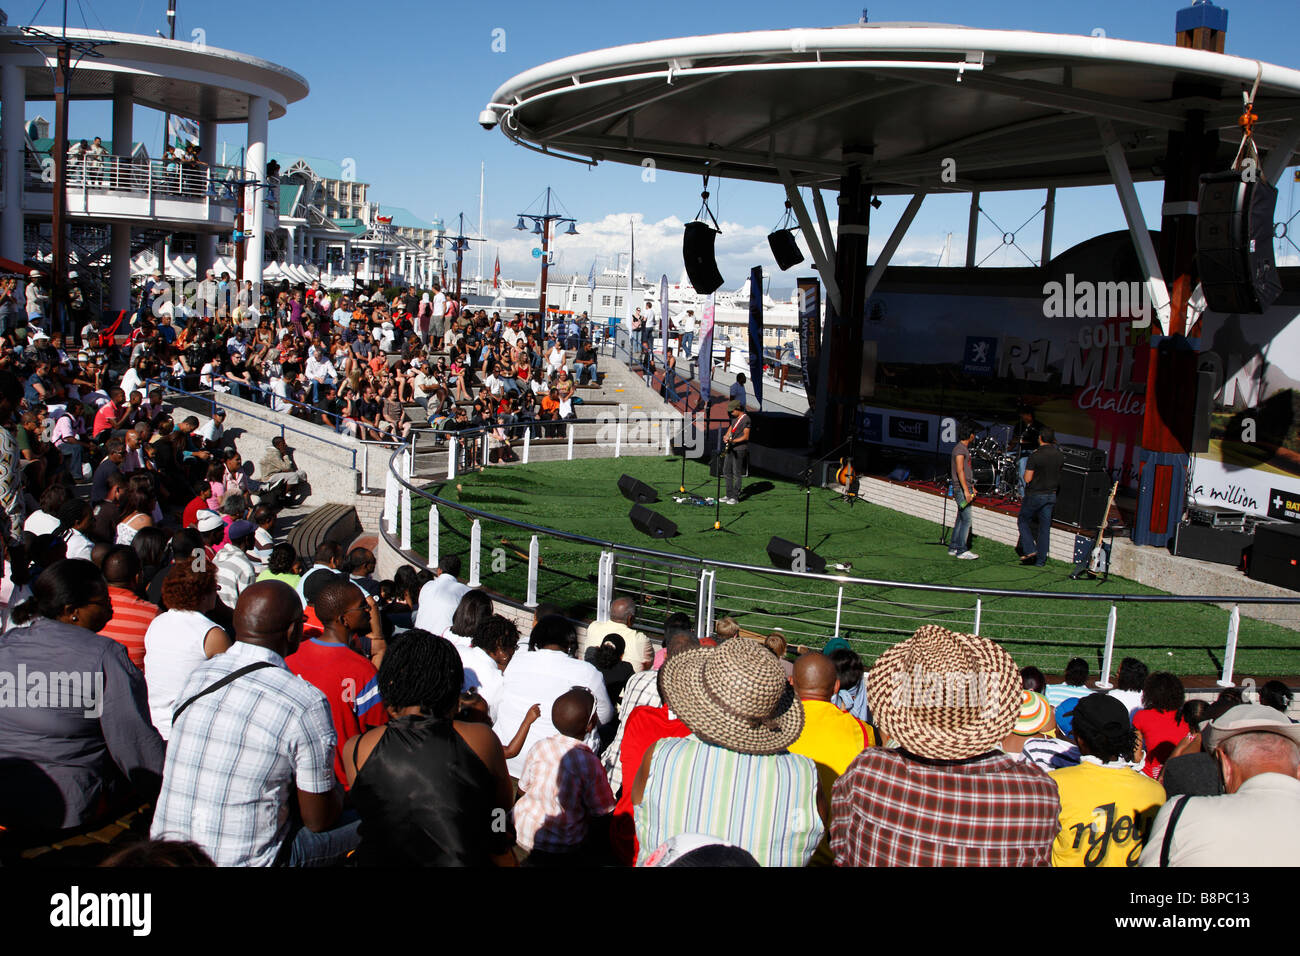 crowd watching a live band at the v&a waterfront amphitheater cape town south africa Stock Photo